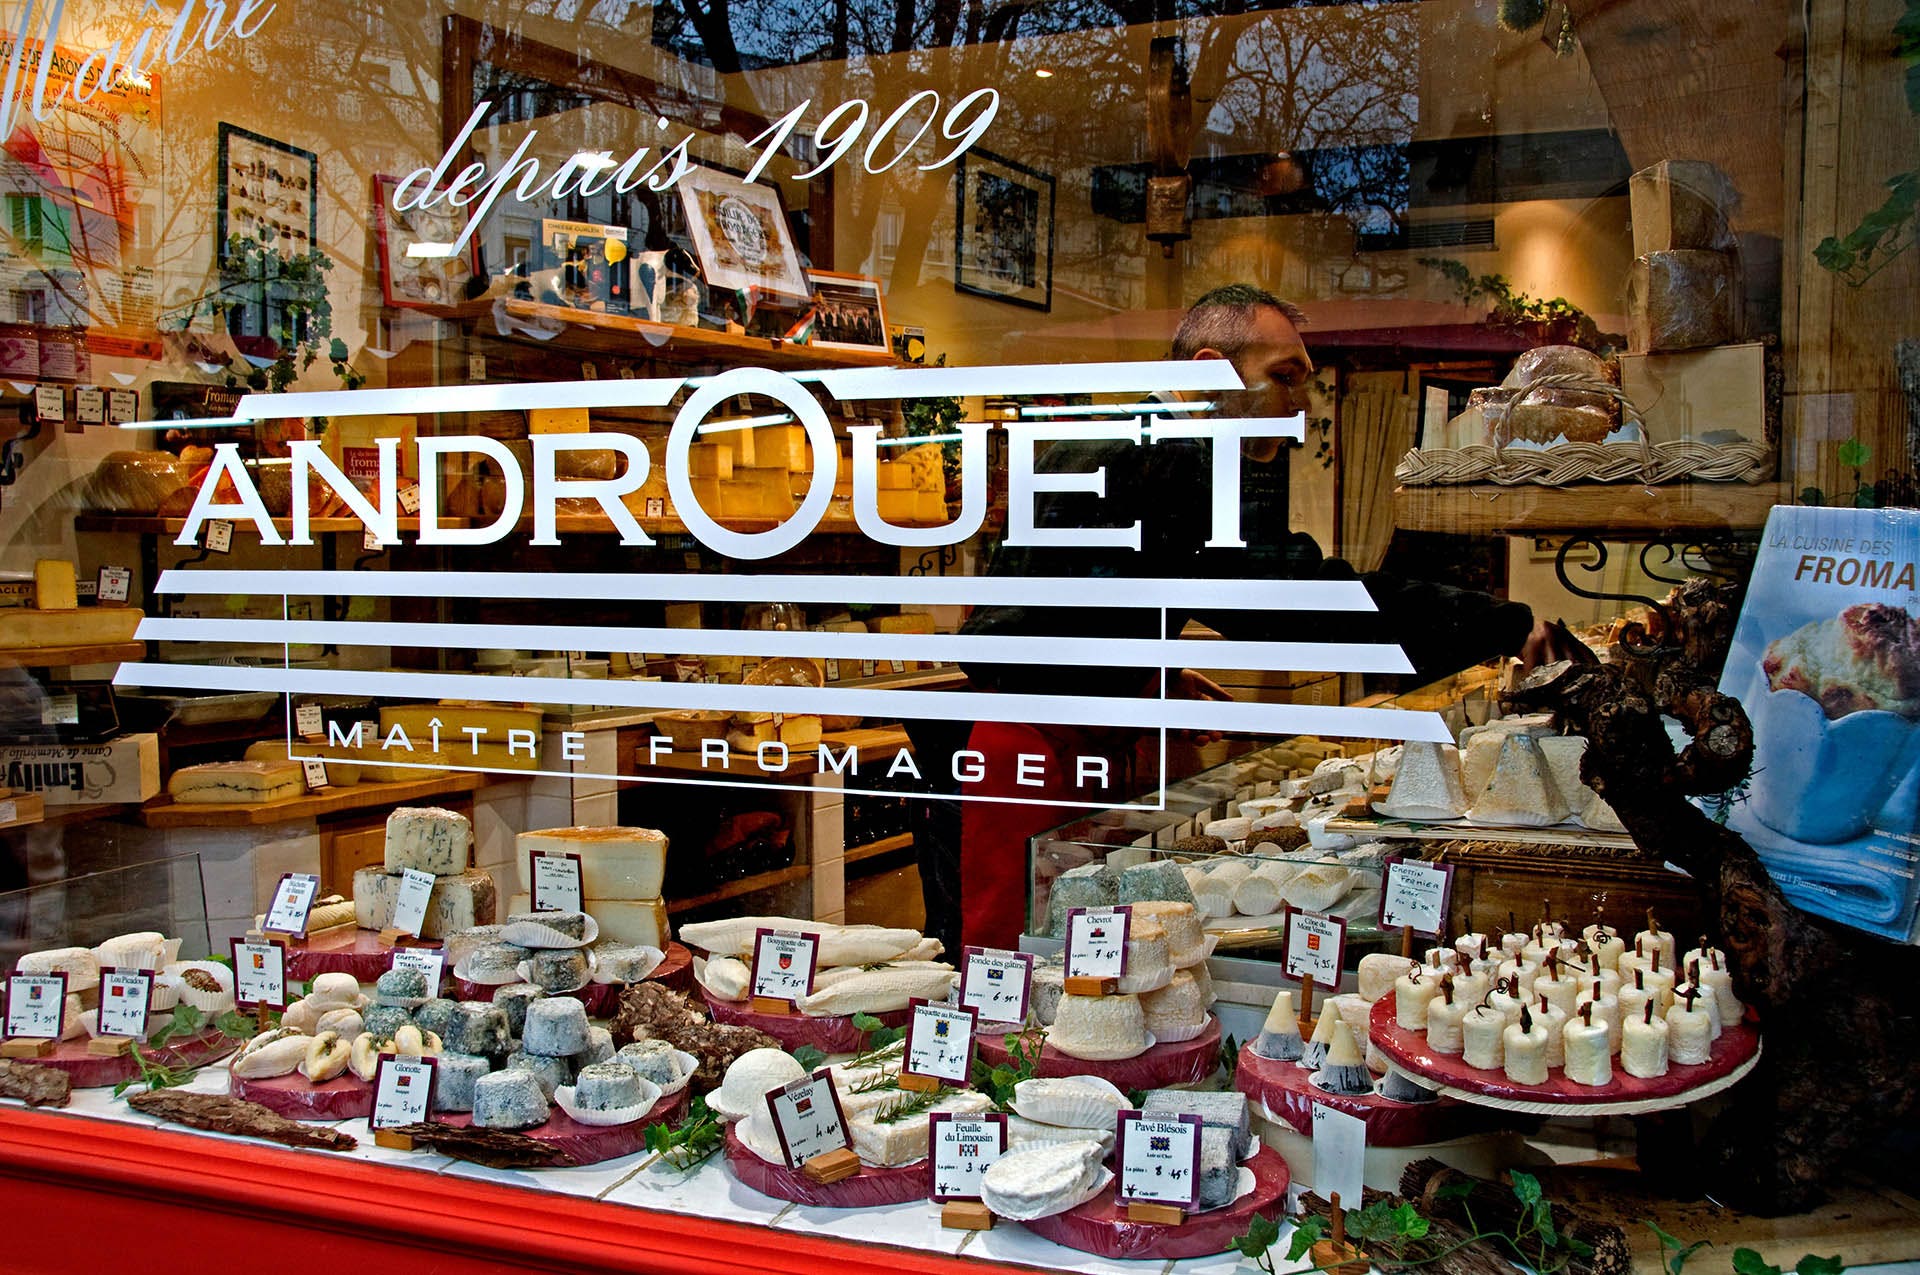 Androuet cheese shop in Paris